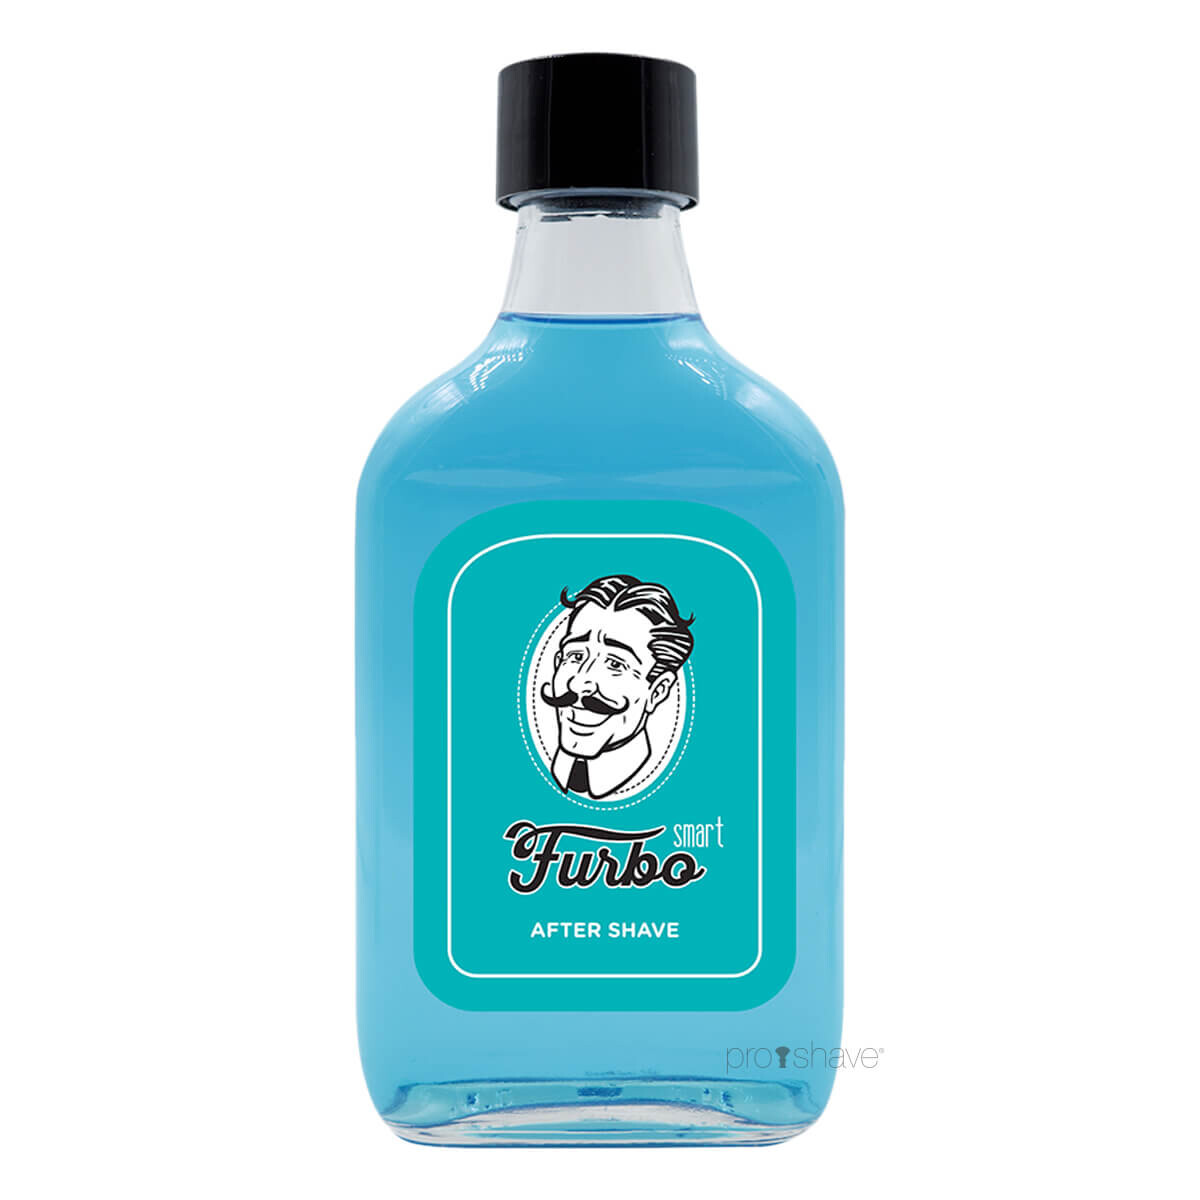 Furbo Aftershave, 200 ml.